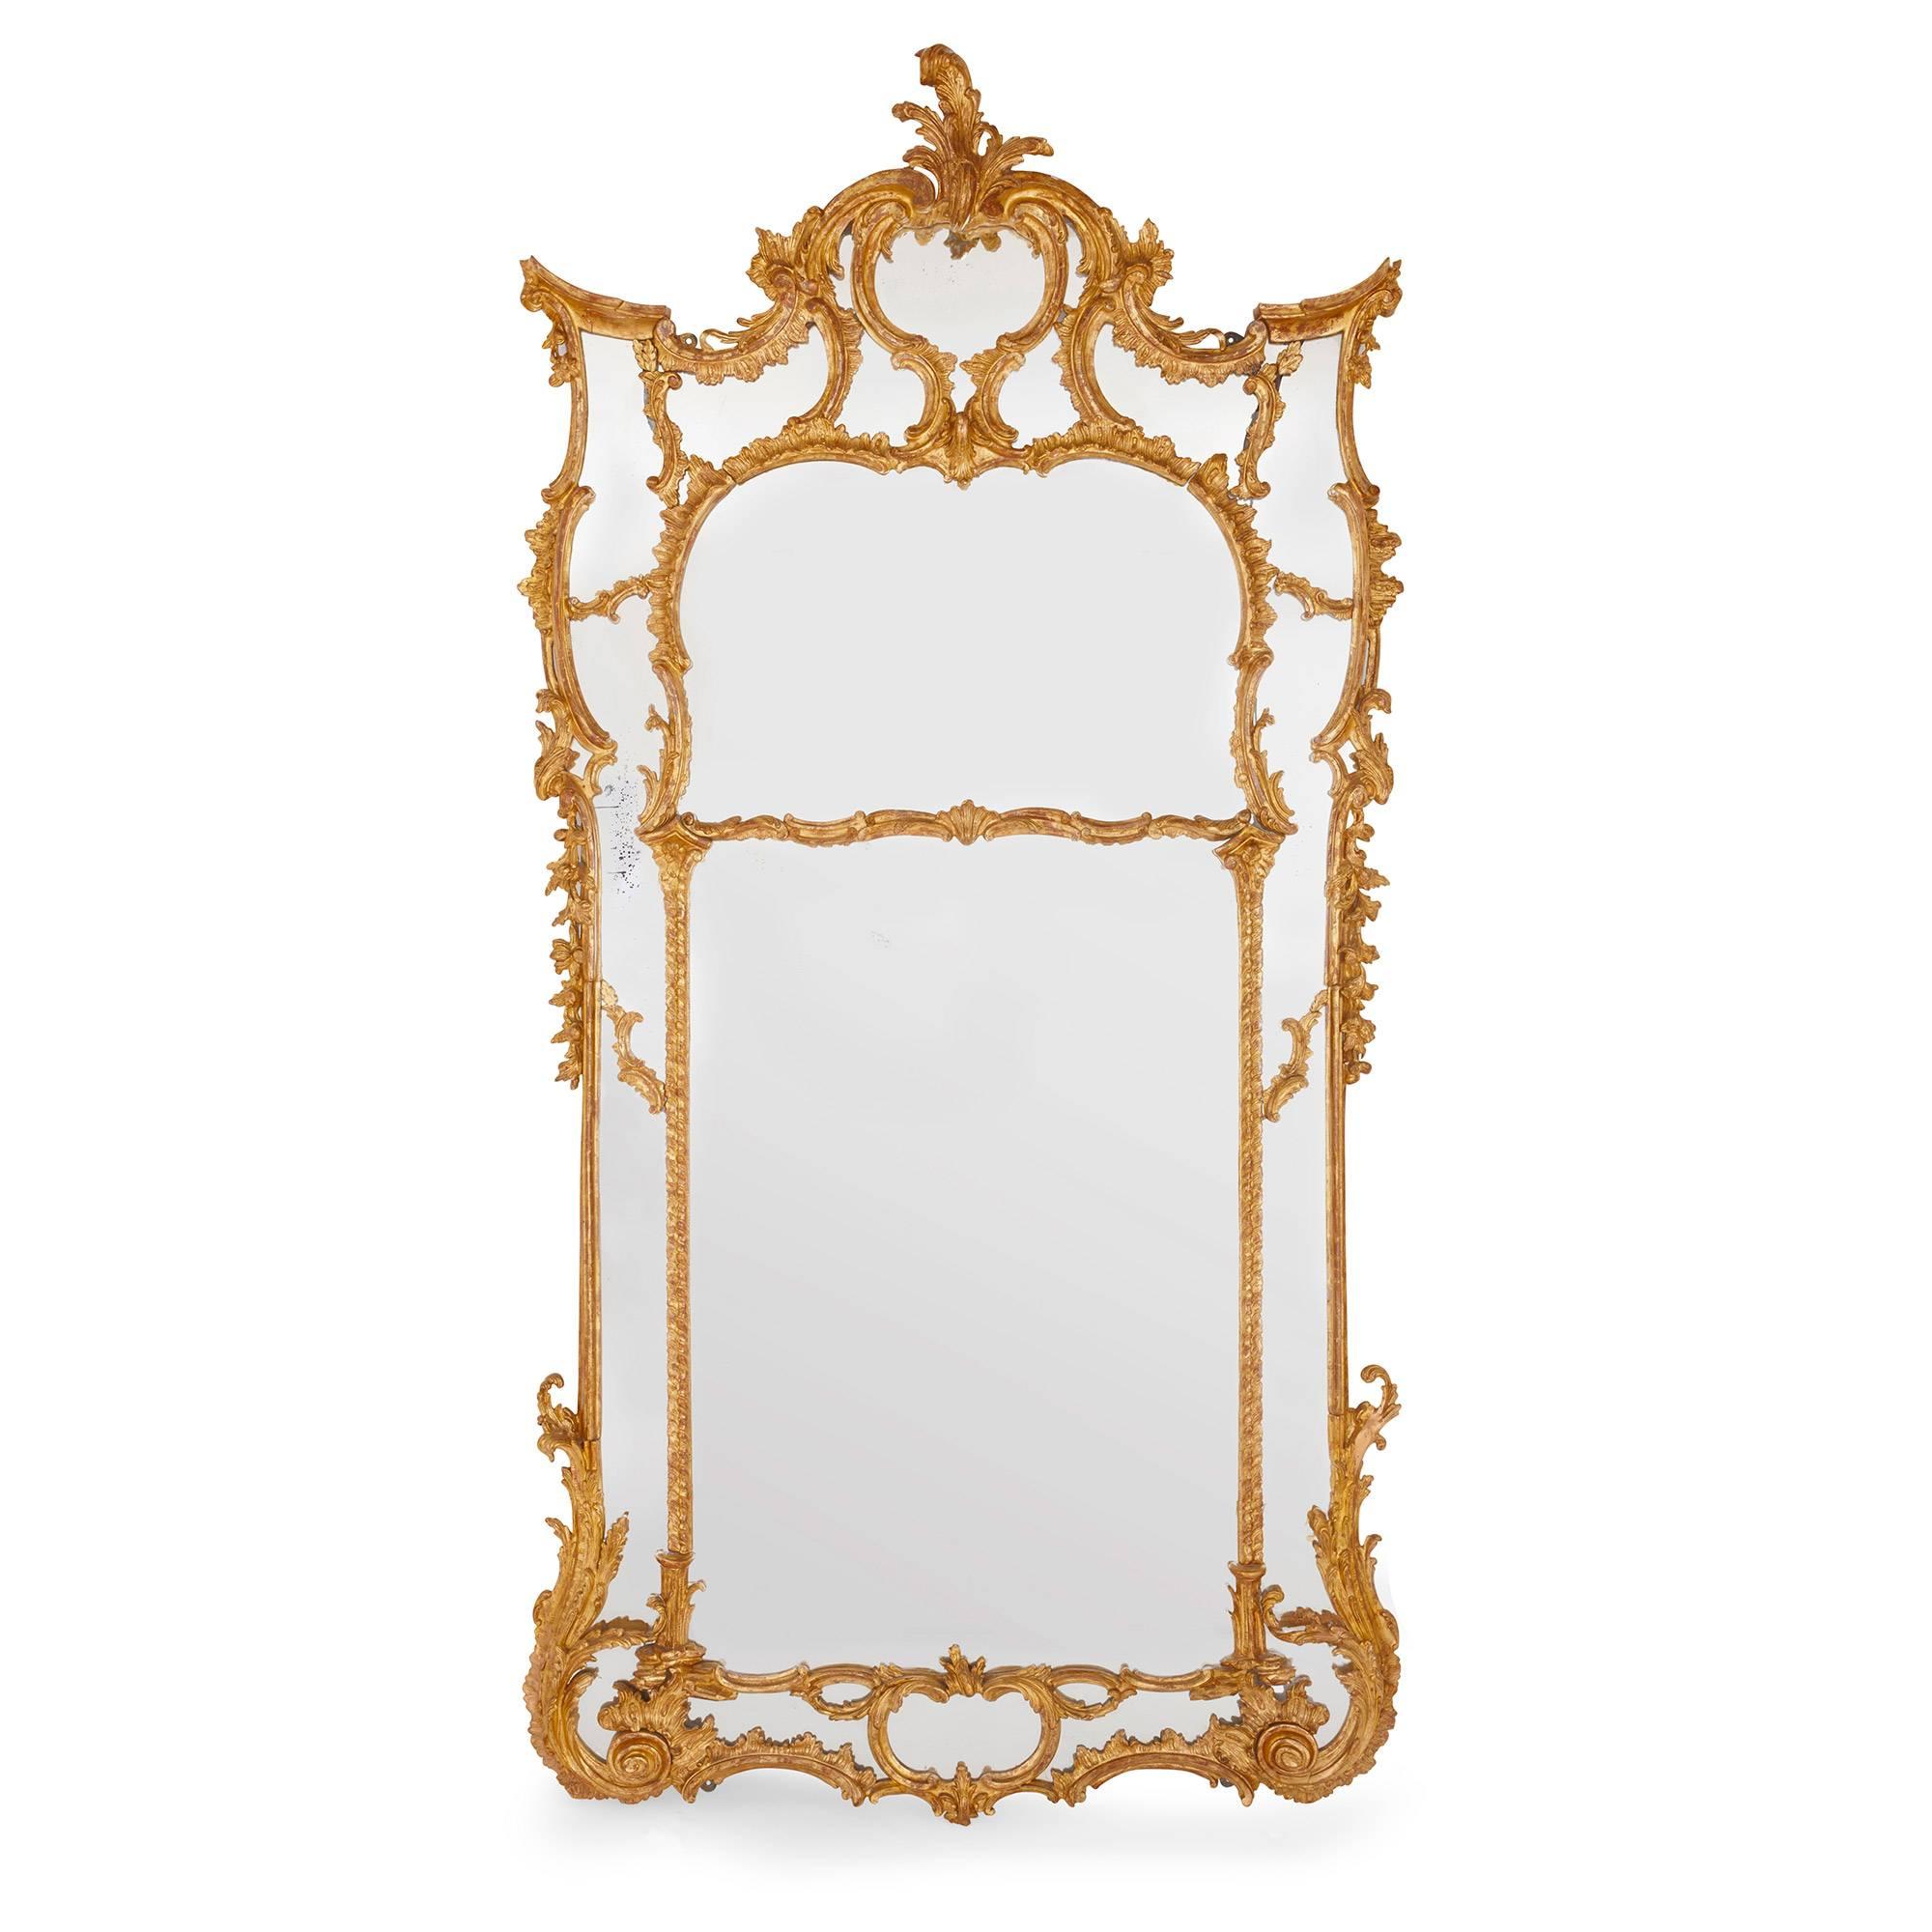 These monumental 19th century English giltwood mirrors are stunning in their ornate Rococo style design. Each mirror contains two larger mirror panels bordered by a large number of smaller mirror panels, each individually framed in carved giltwood.